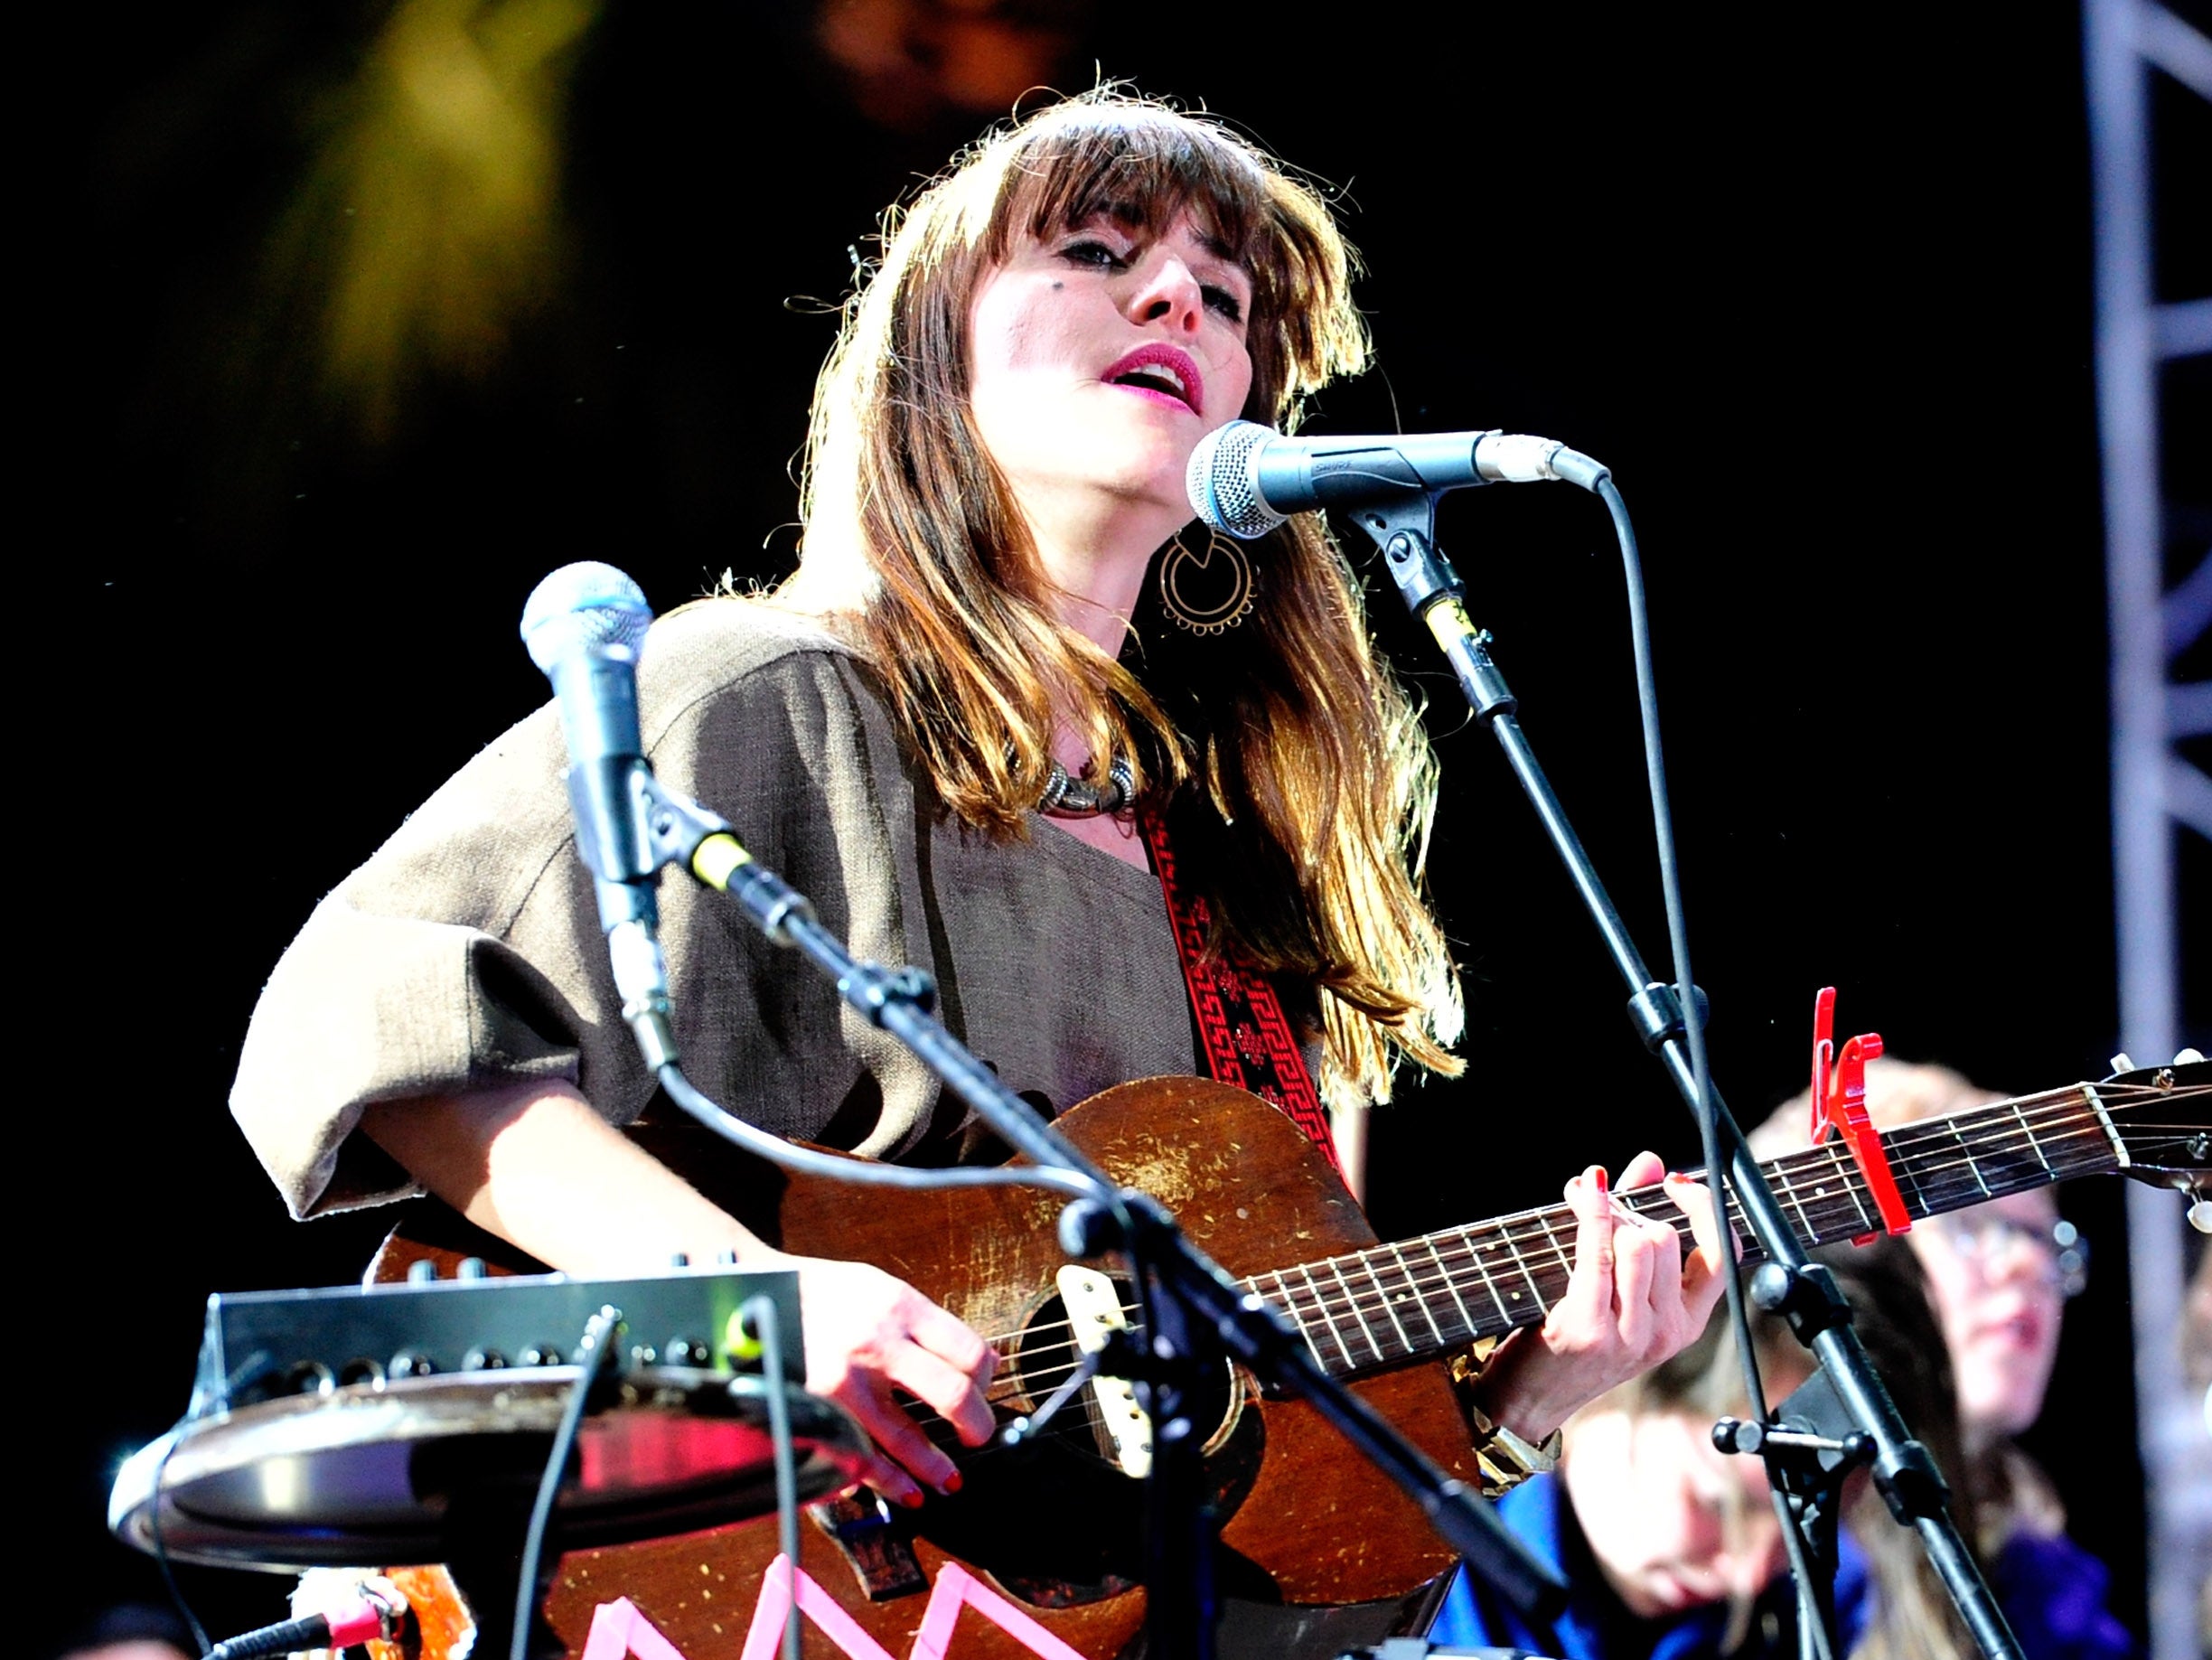 Leslie Feist of the band Feist performs during Day 2 of the 2012 Coachella Valley Music & Arts Festival